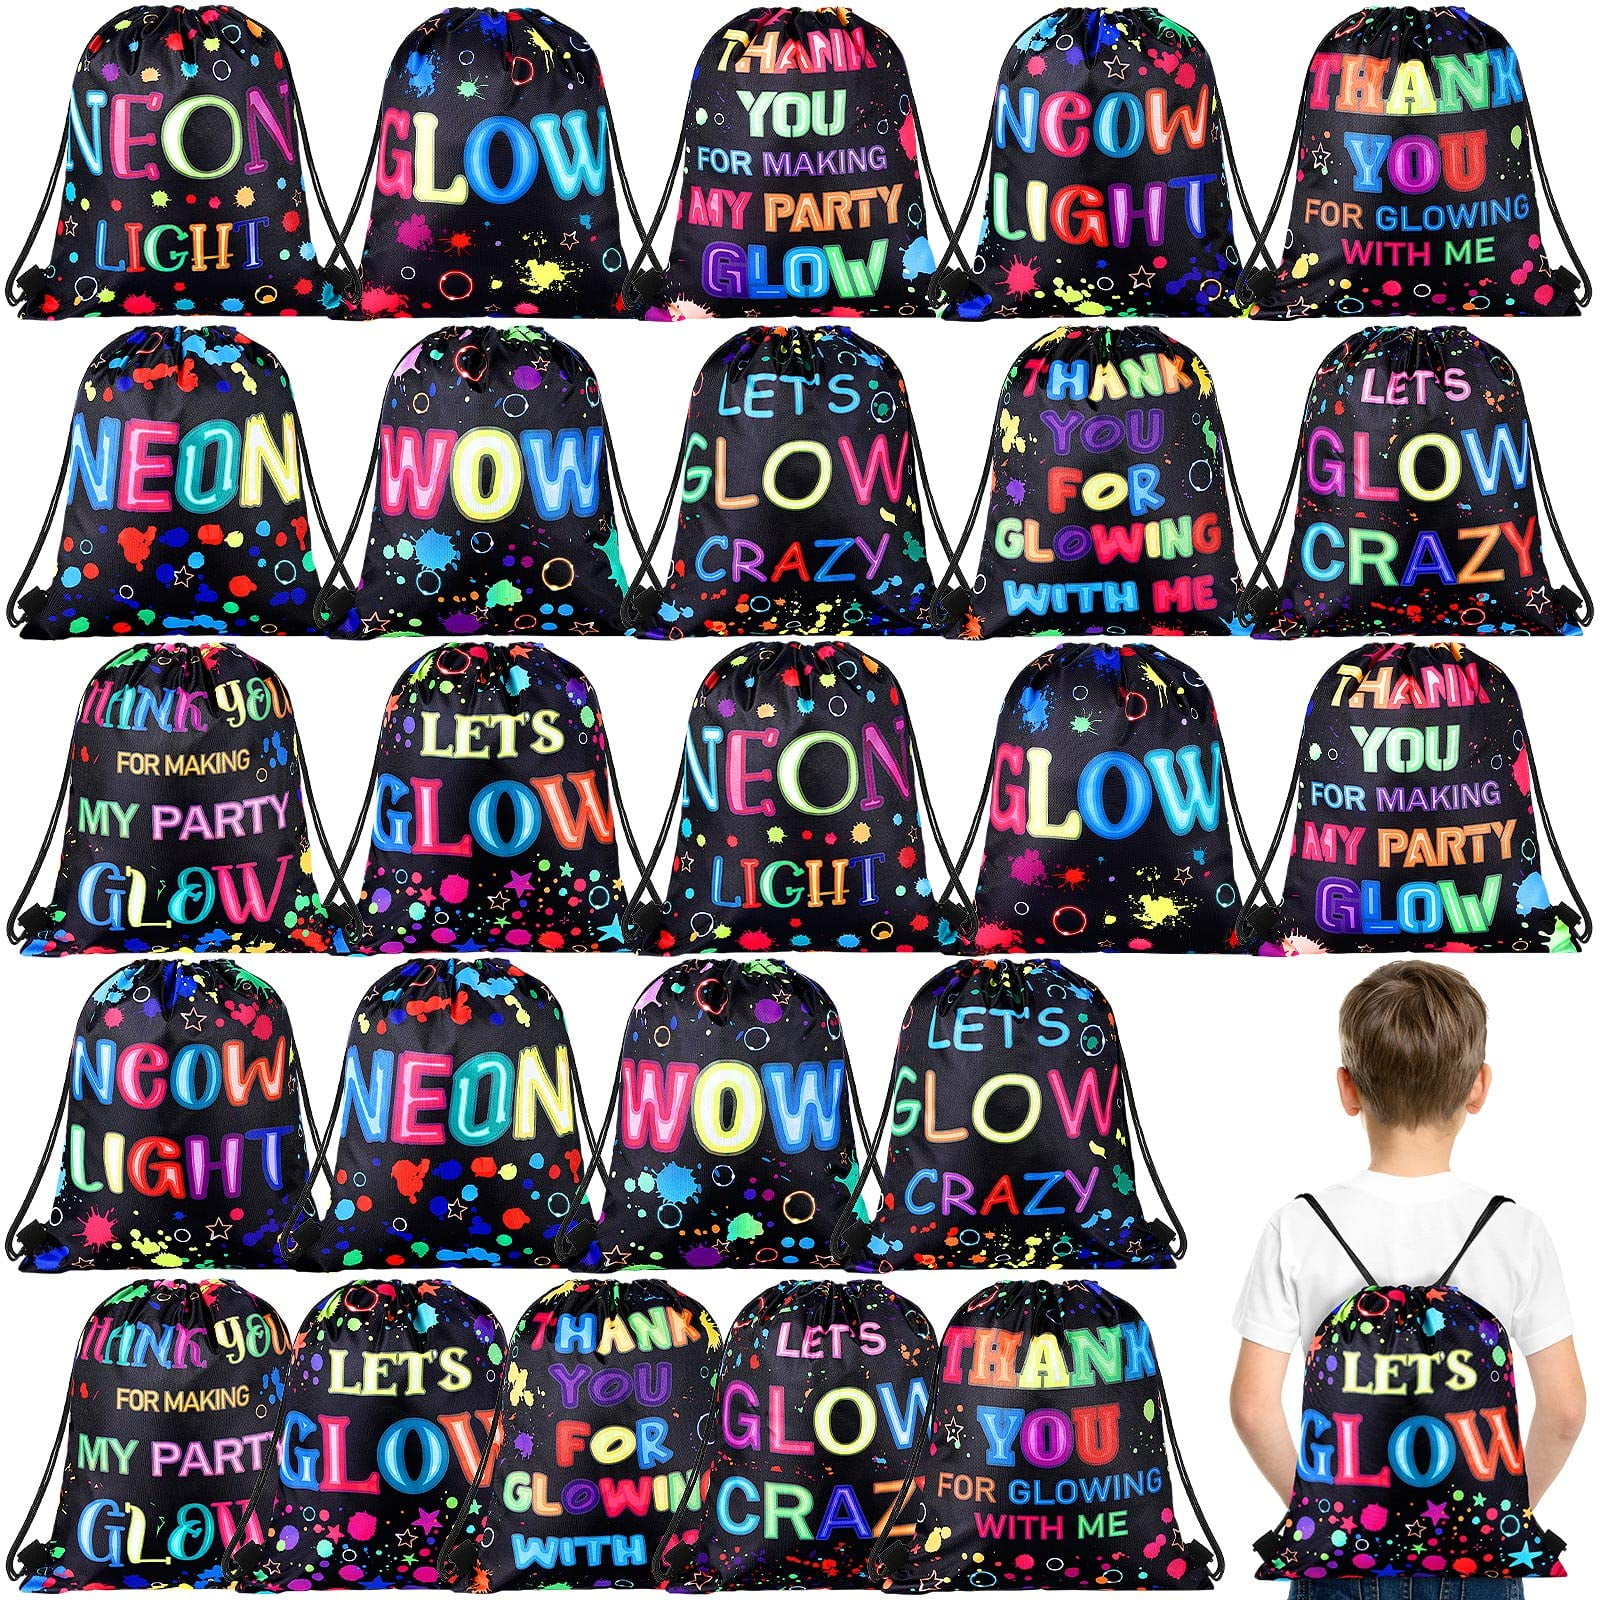 Sweetude 24 Pcs Let's Glow Party Gifts Bags Drawst 